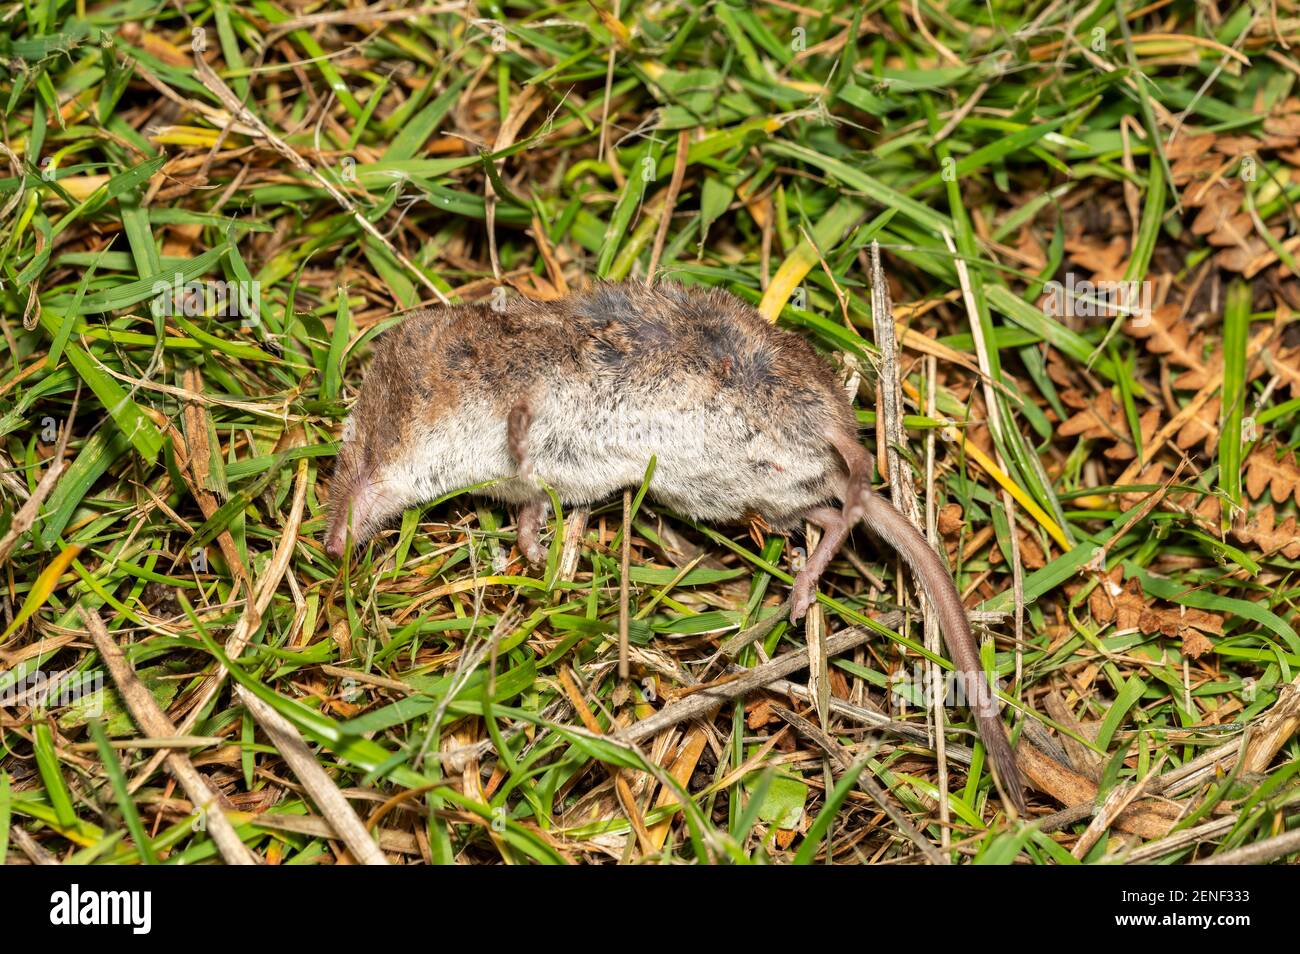 Dead rat rodent having been poisoned and laying lifeless to eliminate vermin Stock Photo